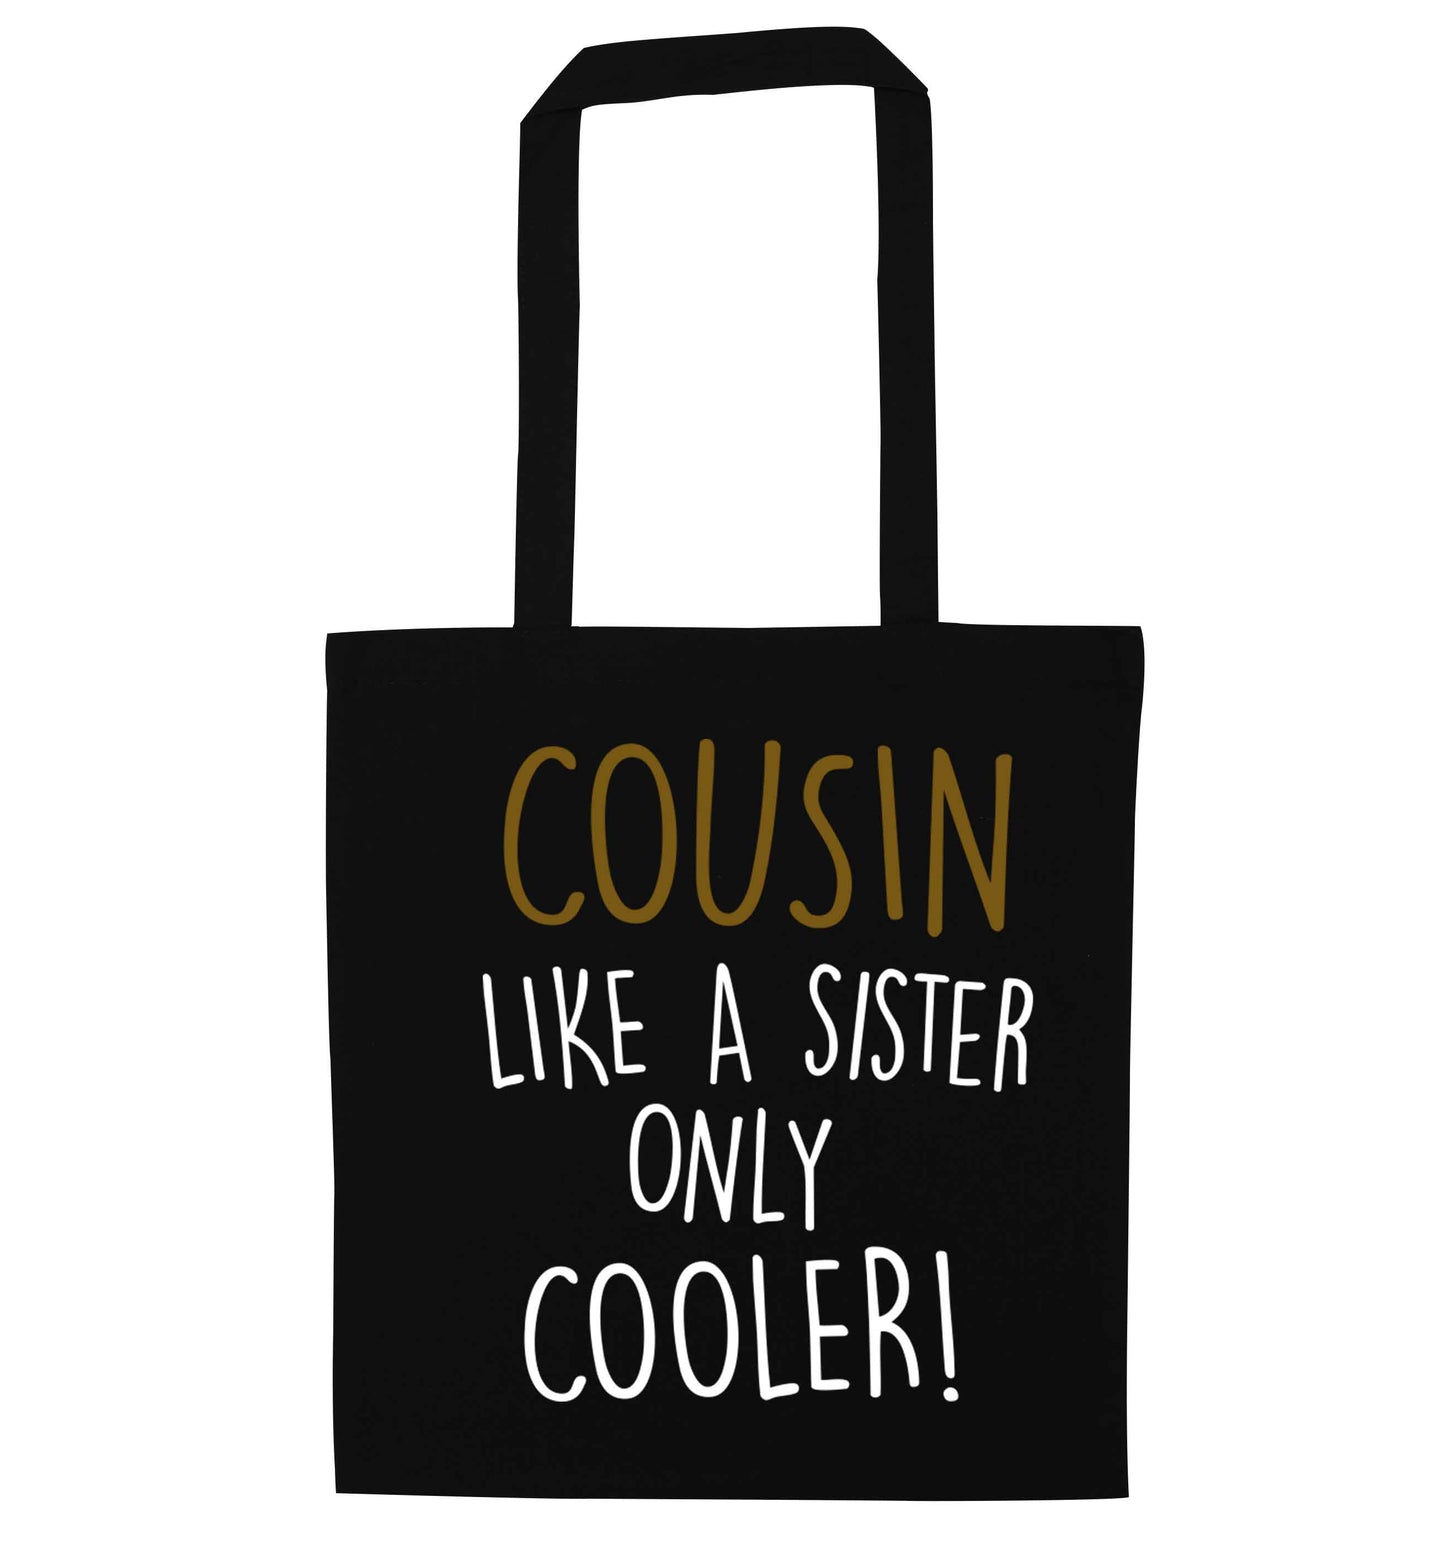 Cousin like a sister only cooler black tote bag